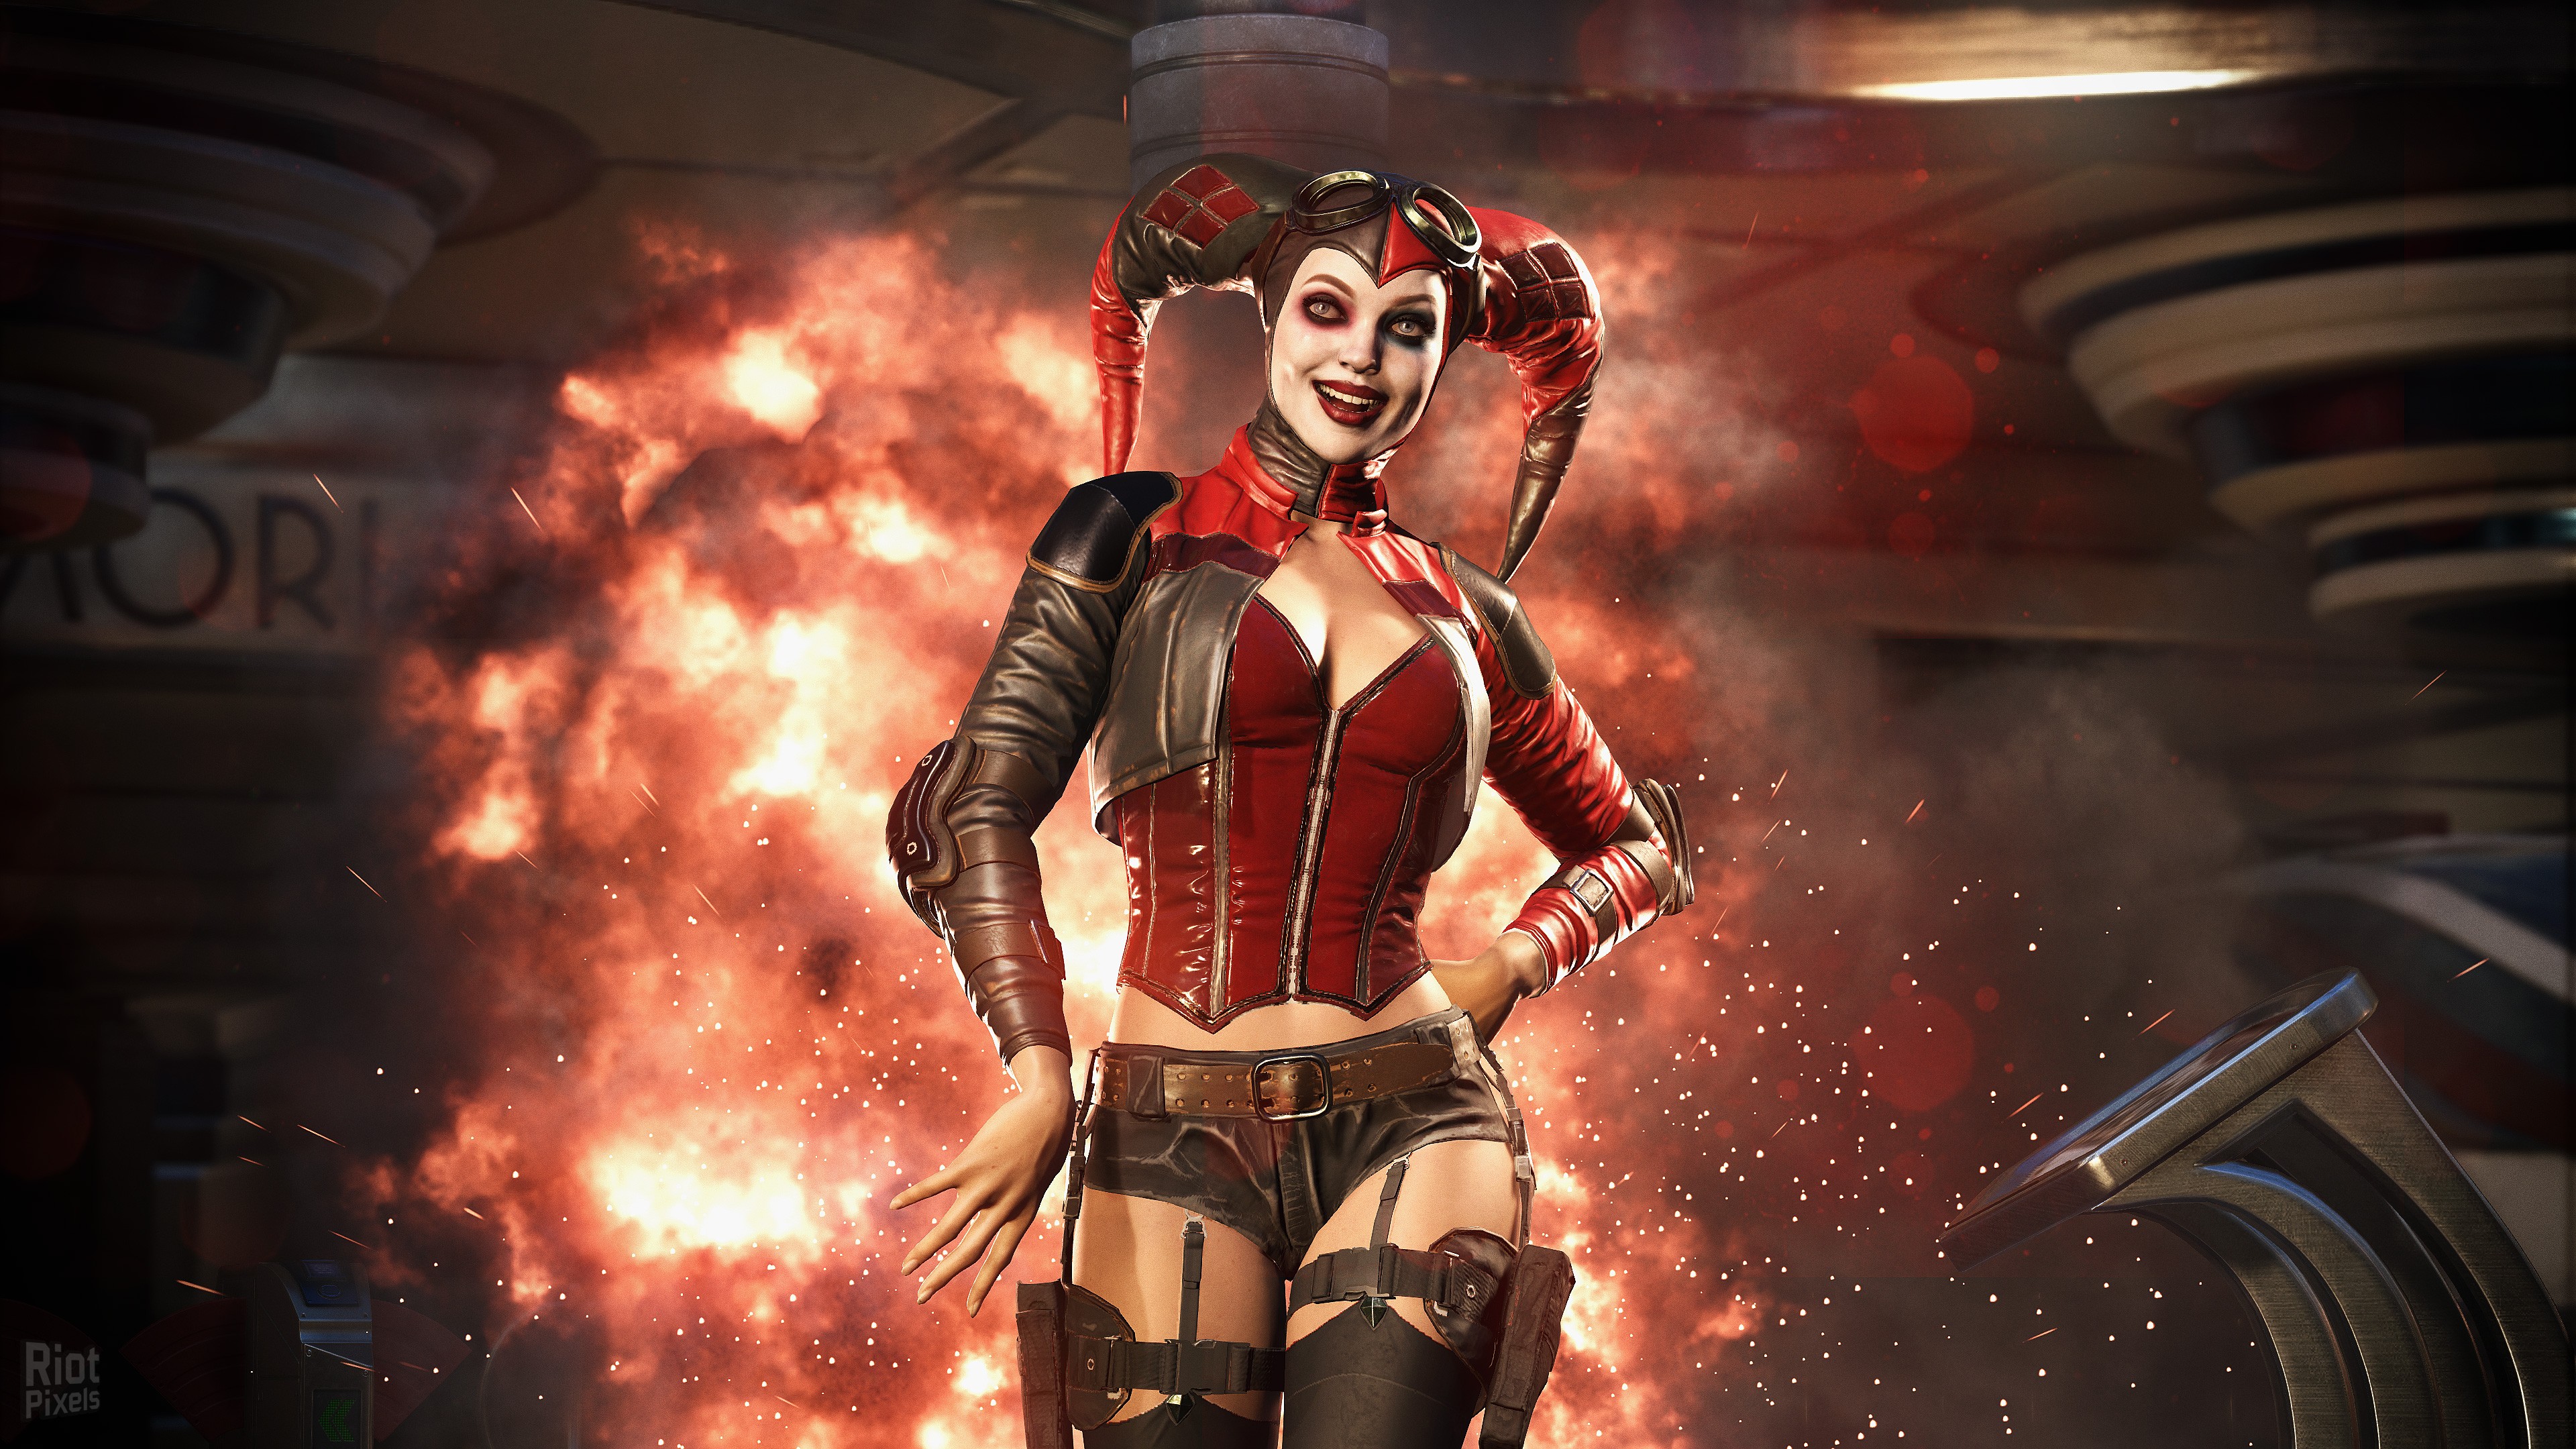 Wallpaper Injustice Harley Quinn, fighting, PC, PlayStation, PS Xbox One, Games